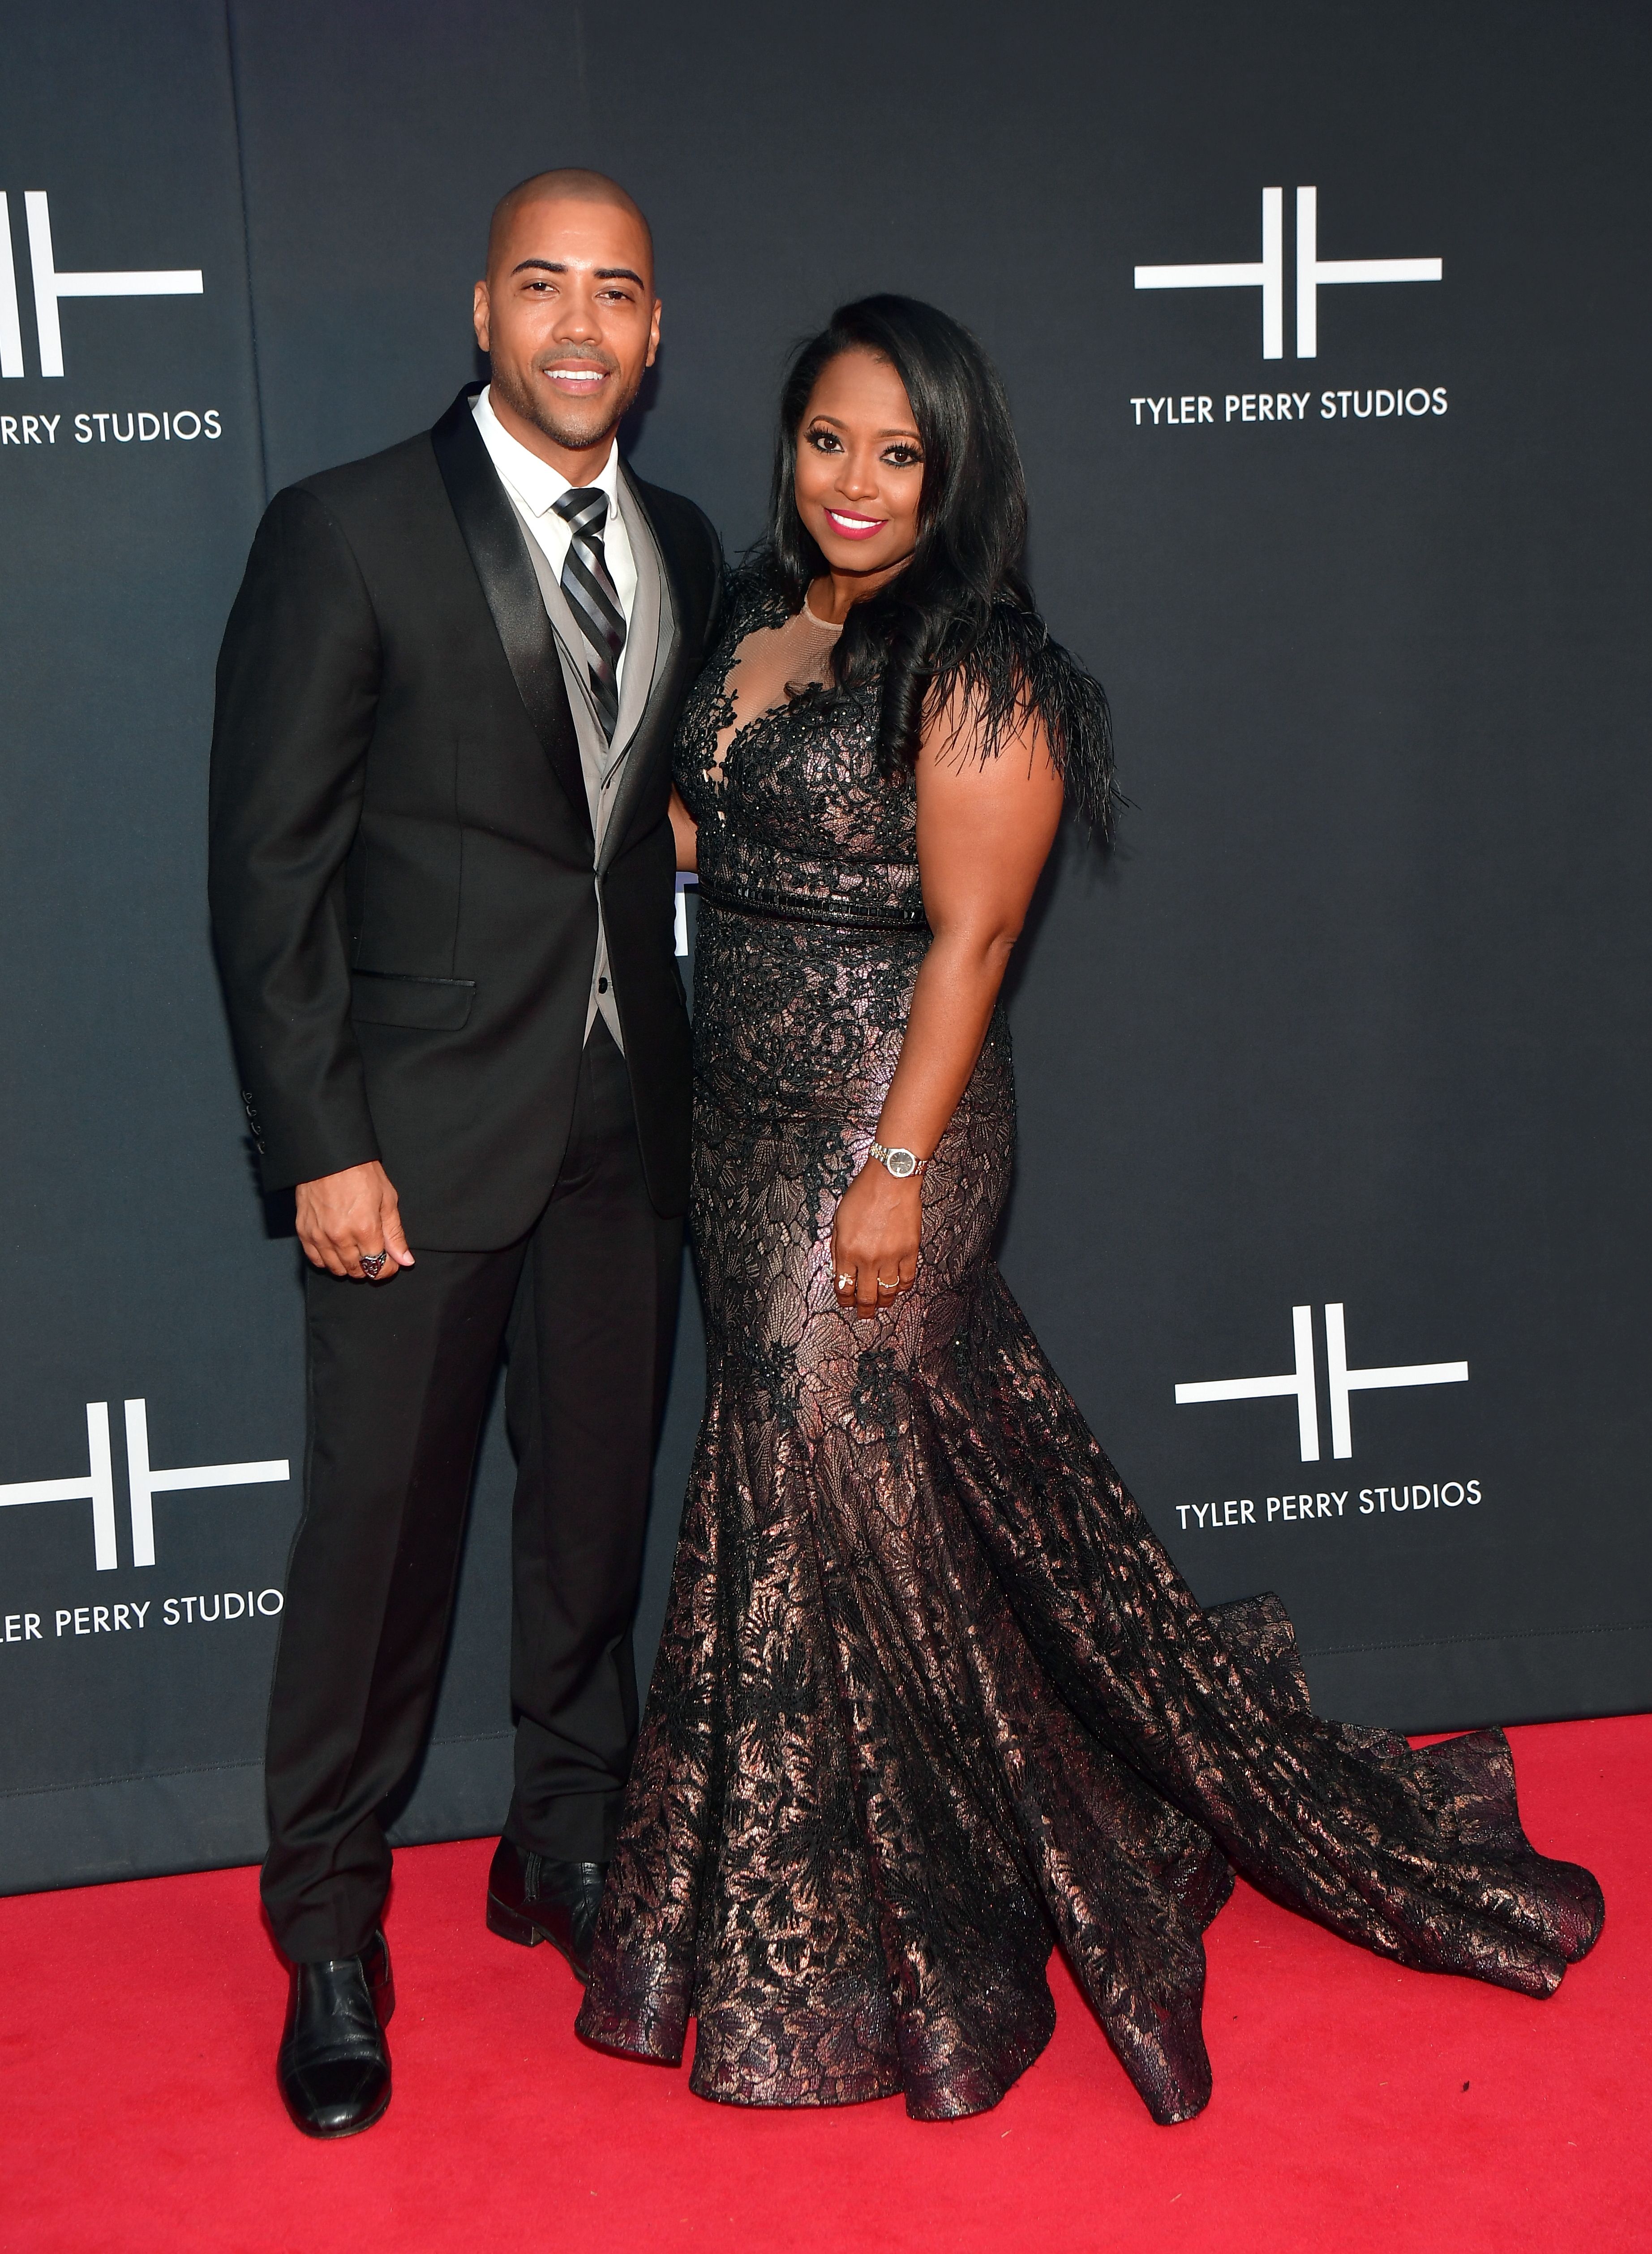 Brad James and Keshia Knight Pulliam during Tyler Perry Studios' grand opening gala at Tyler Perry Studios on October 5, 2019 in Atlanta, Georgia  | Photo: Getty Images